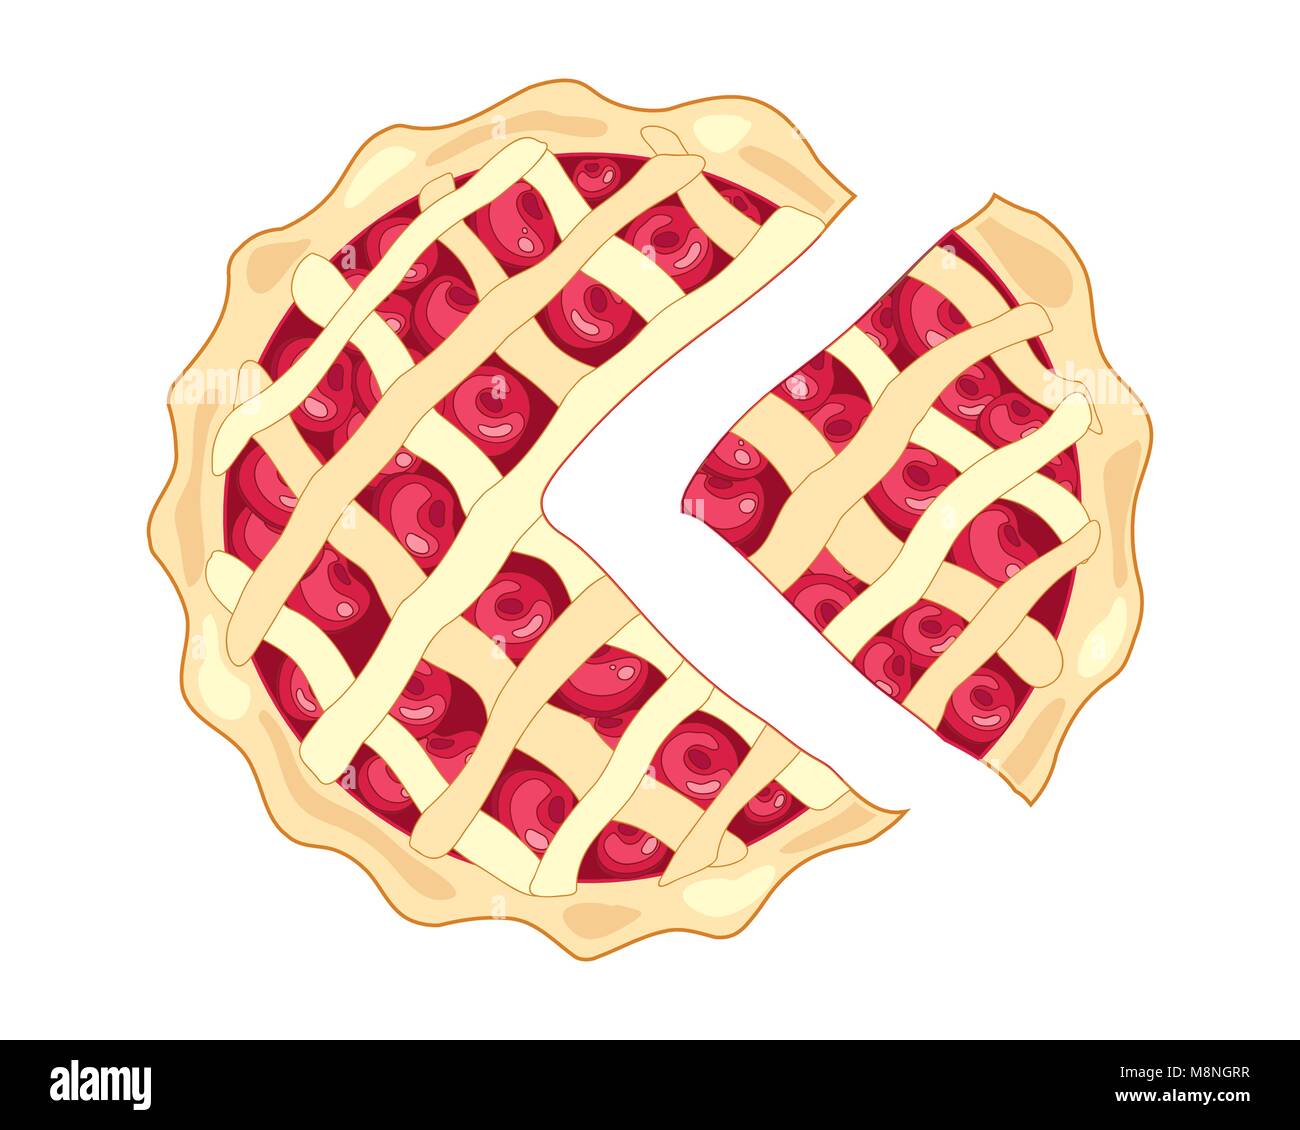 a vector illustration in eps format of a slice of cherry pie with a golden crust and lattice design with plump ripe red cherries on a white background Stock Vector